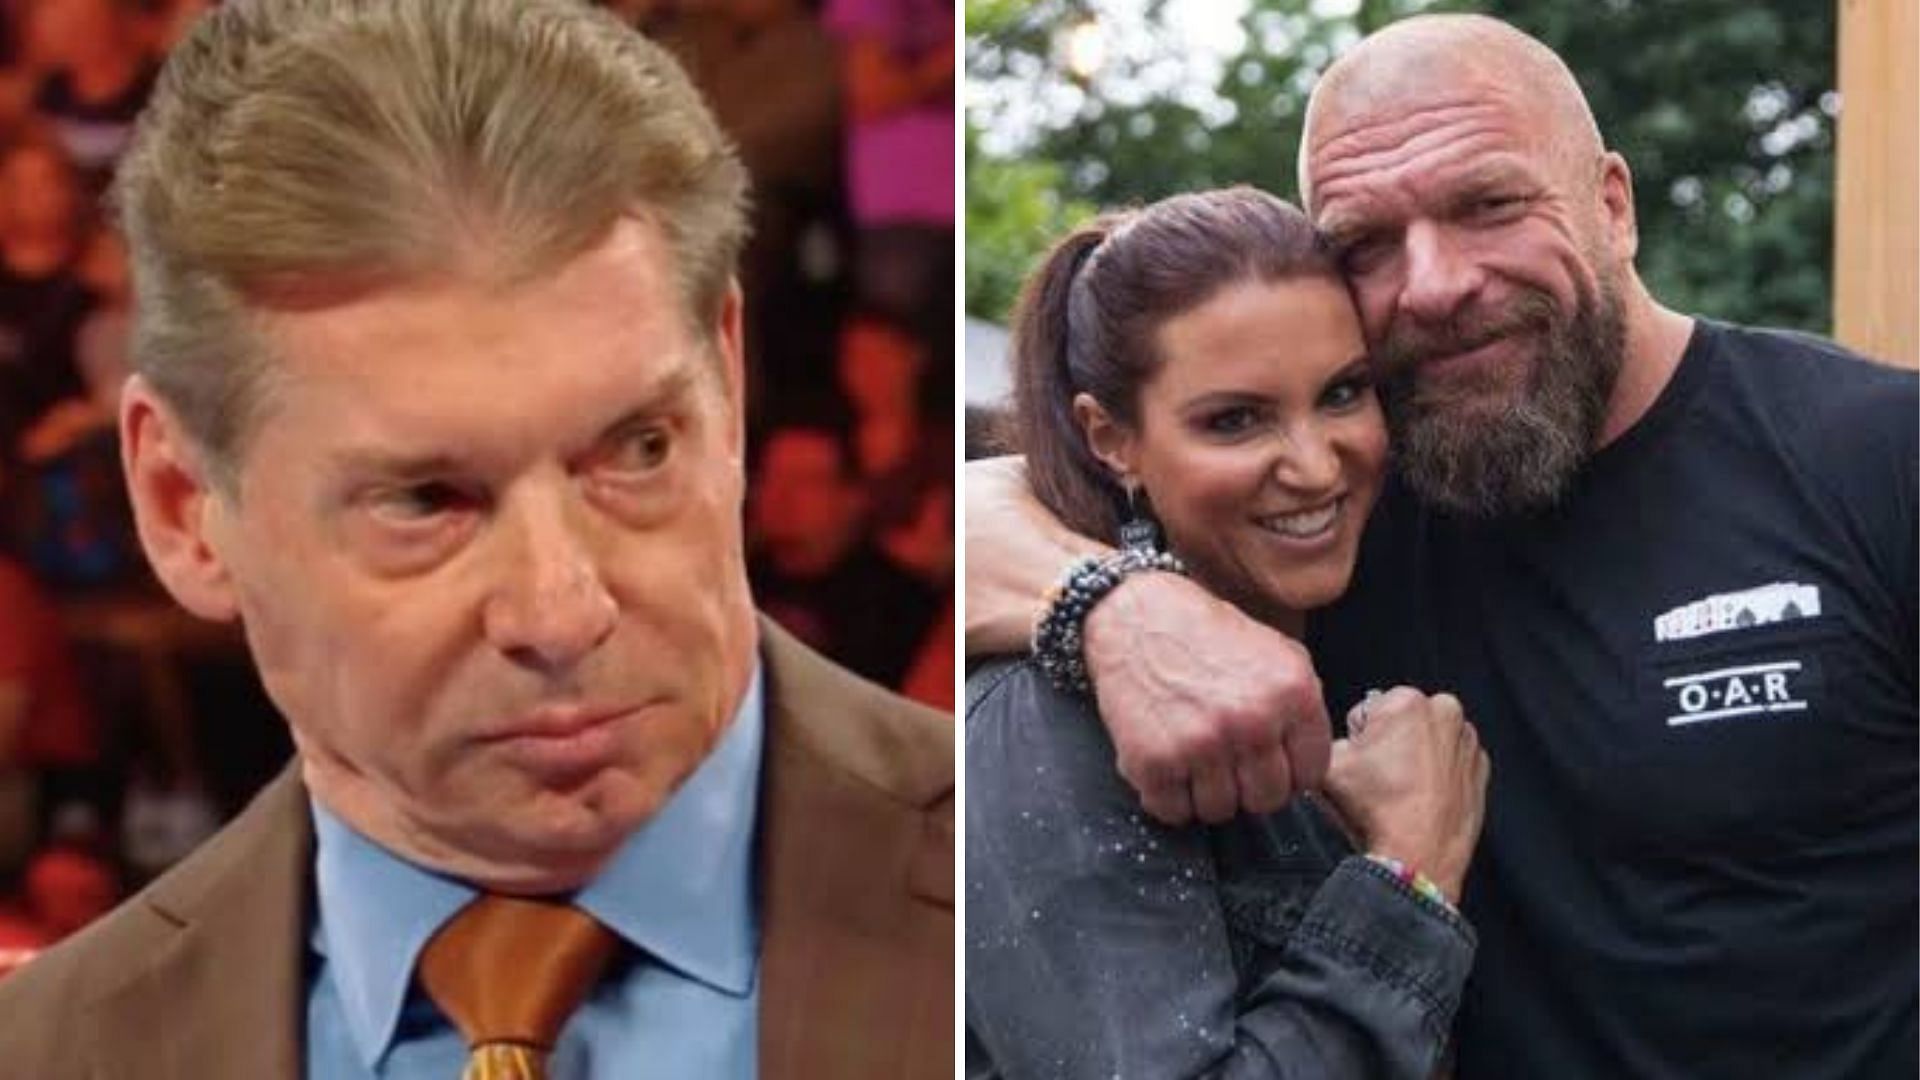 Vince McMahon shocked the world by returning to WWE.